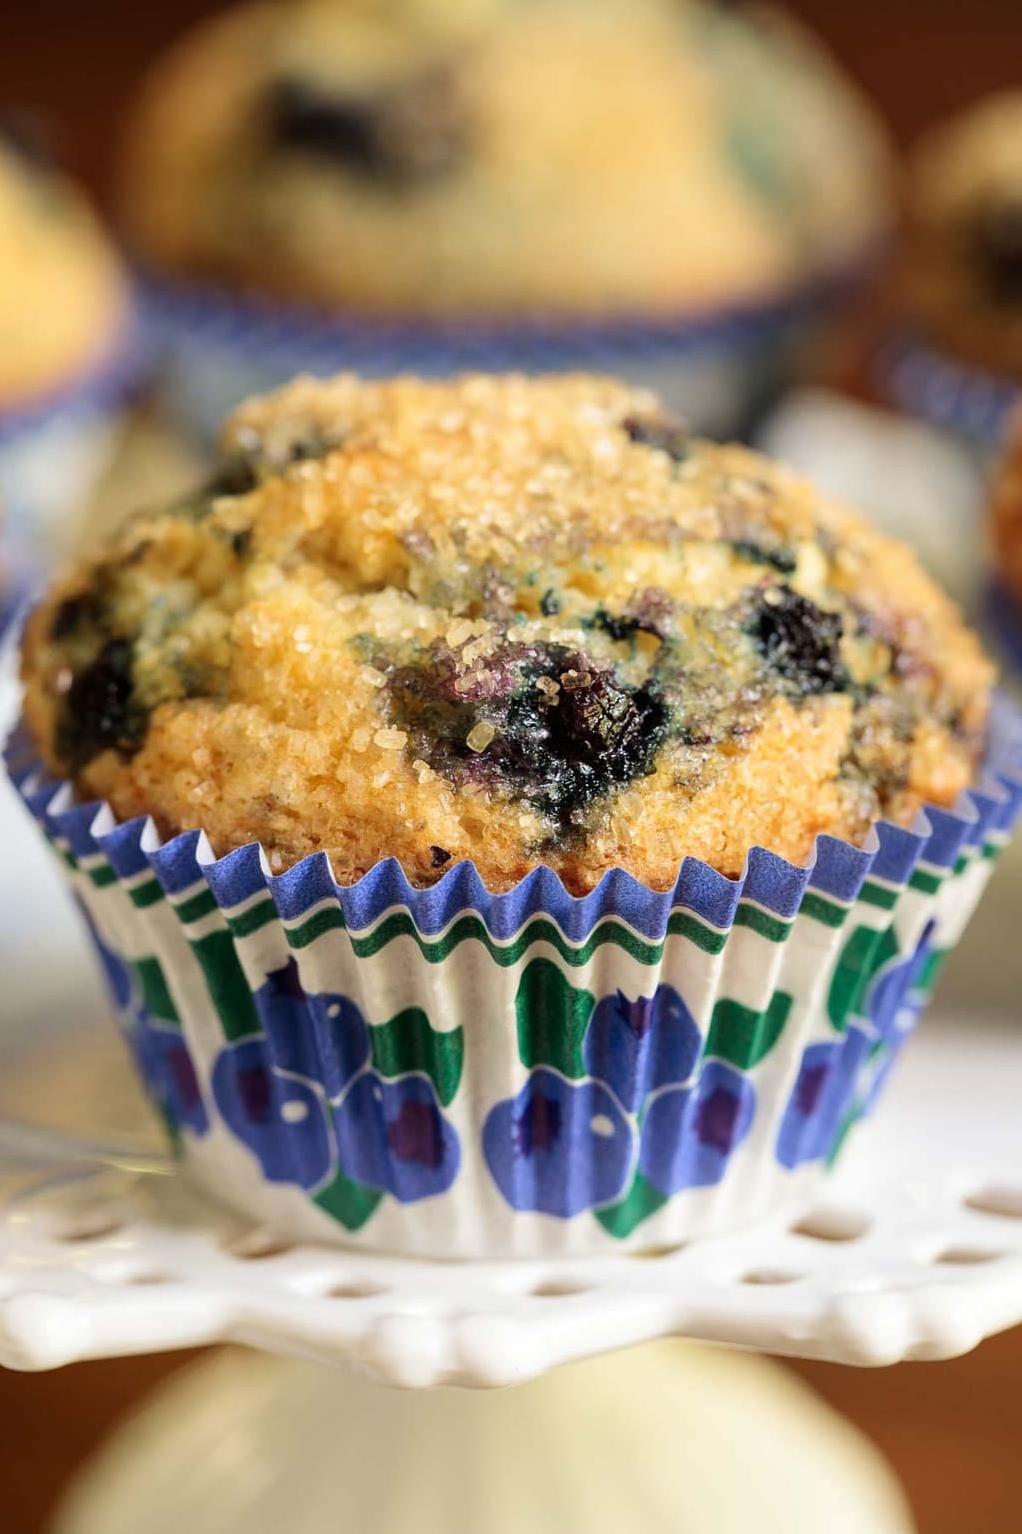  A heavenly aroma wafts from the oven as these blueberry muffins bake to perfection.